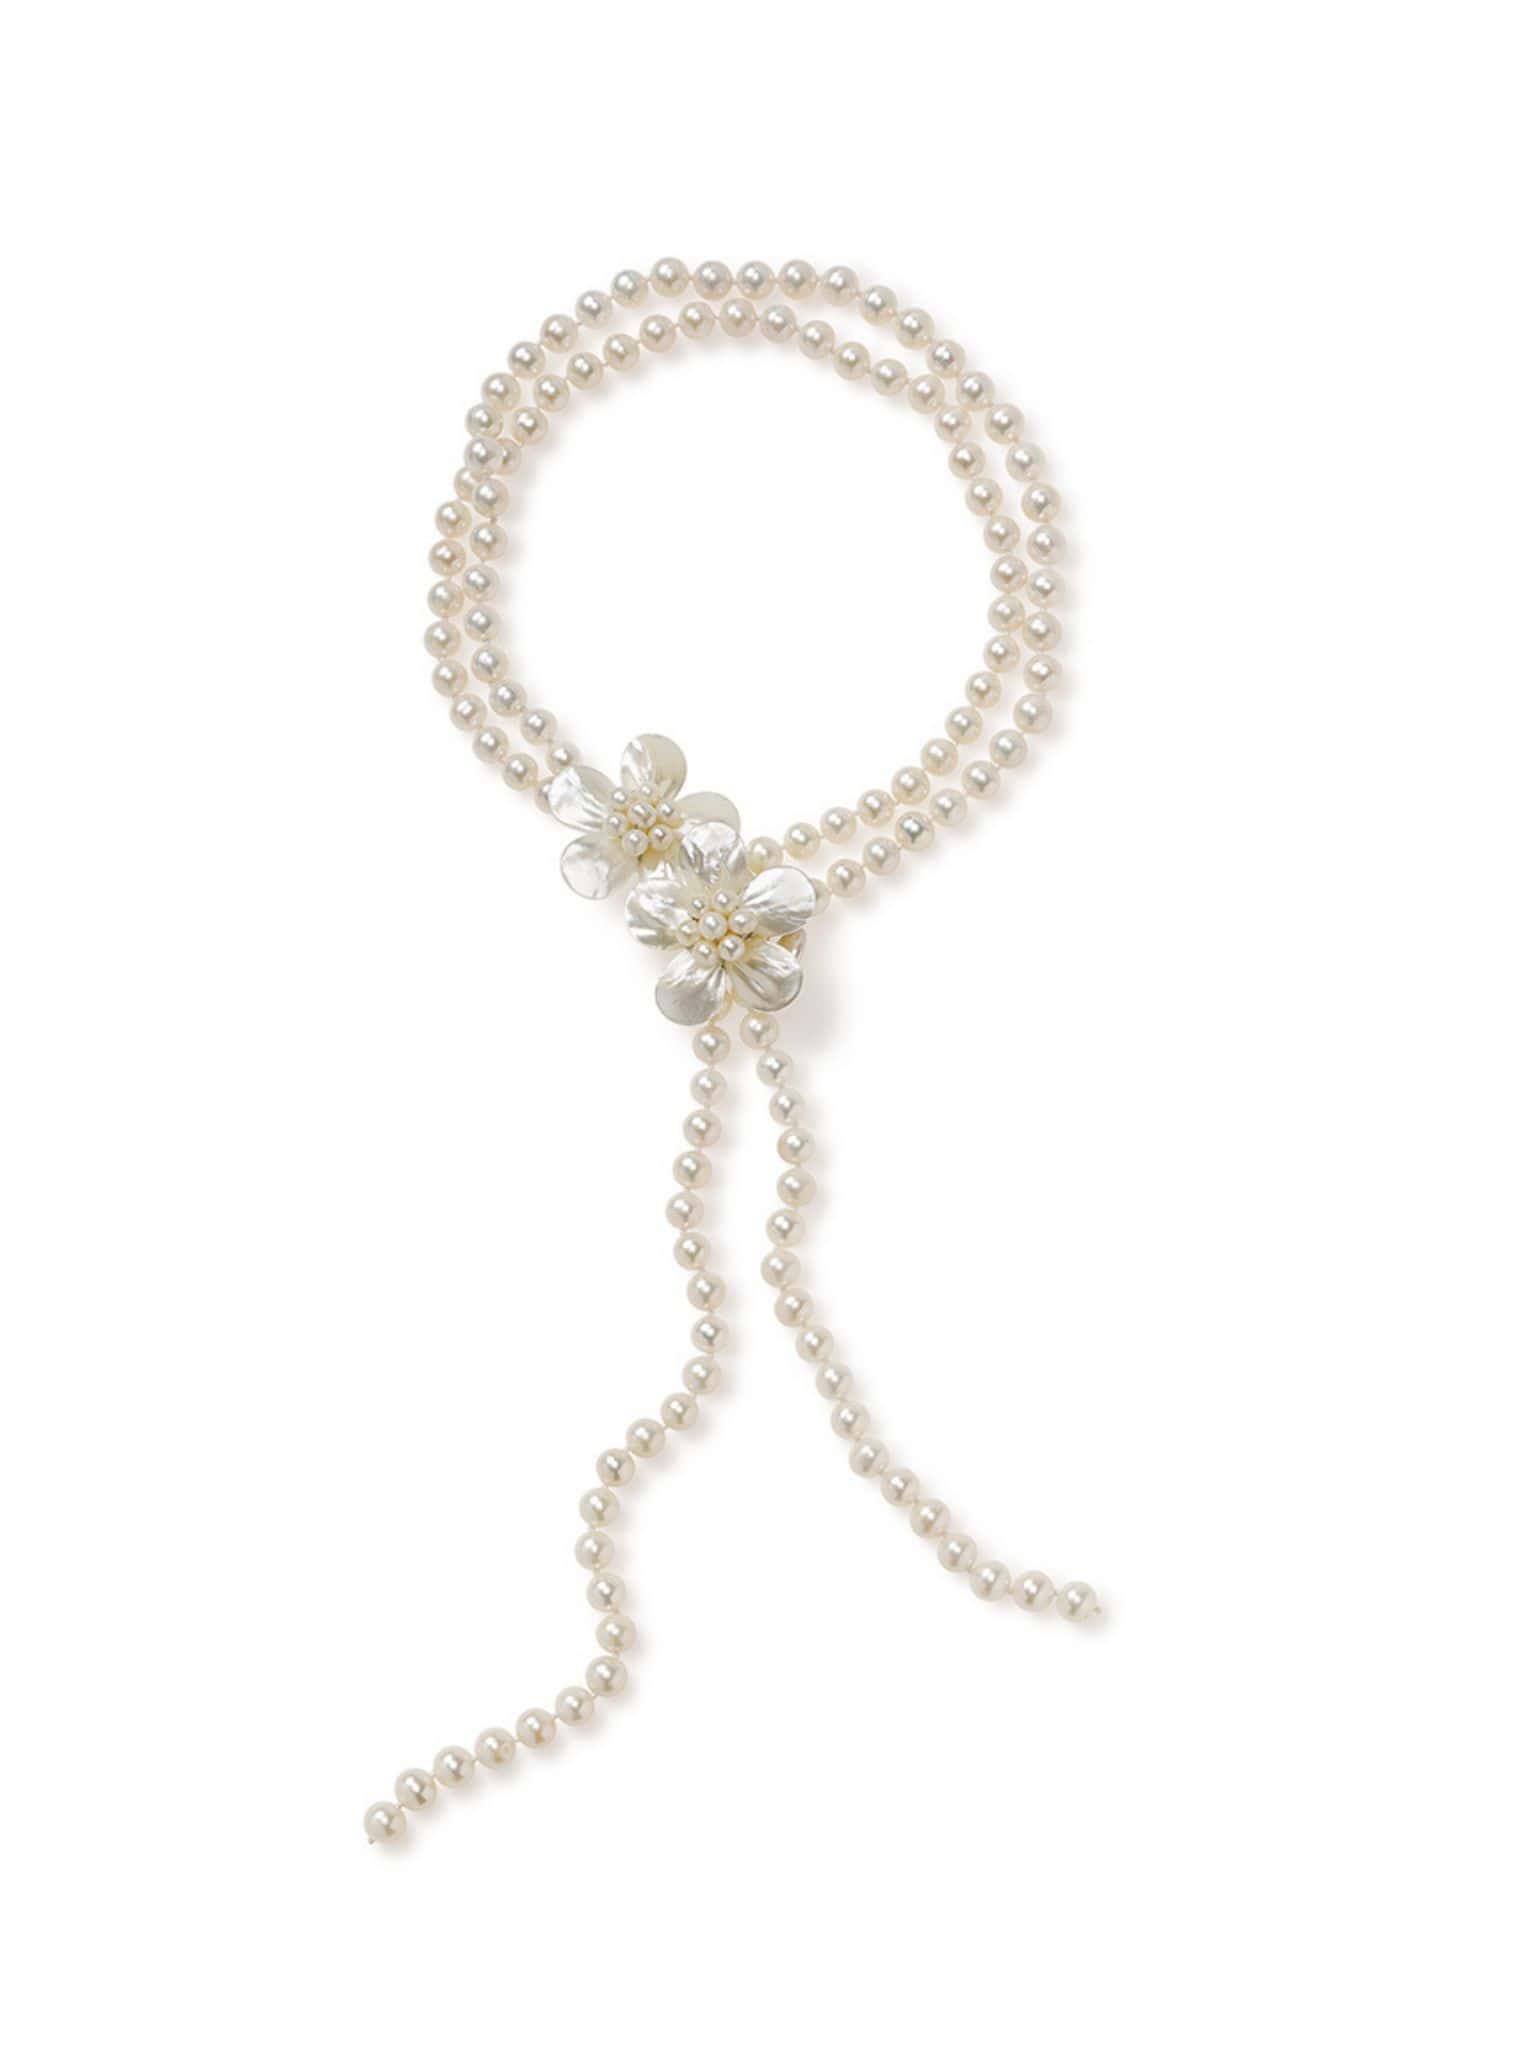 Handmade Flower Necklace Made of Freshwater Pearls/pearl Necklace